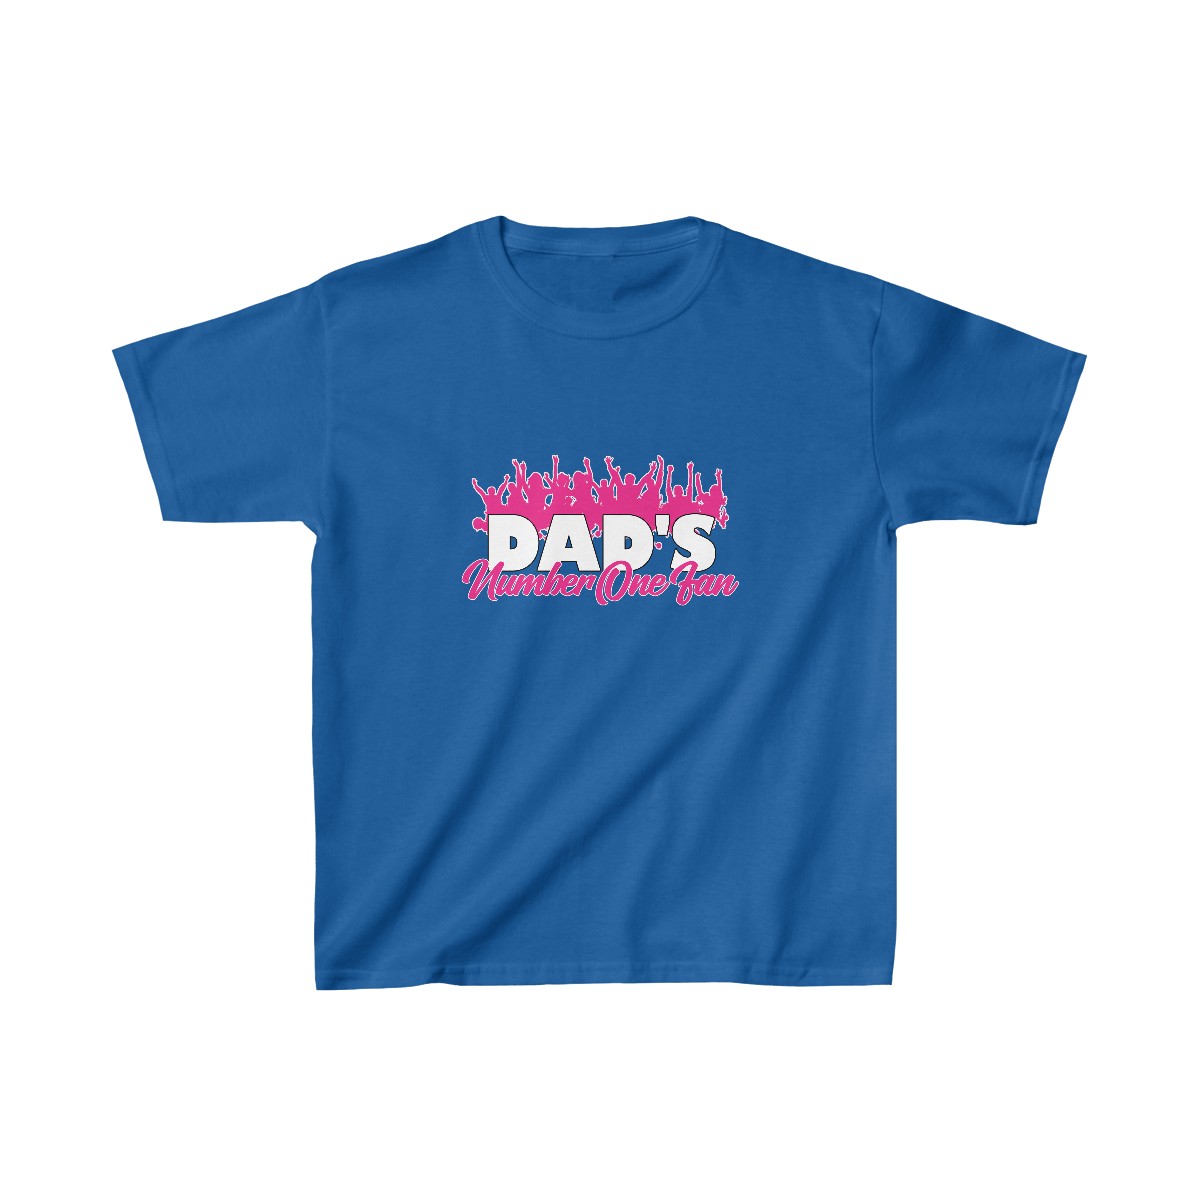 Dad's Number One Fan Kids Heavy Cotton™ Tee, T-shirt